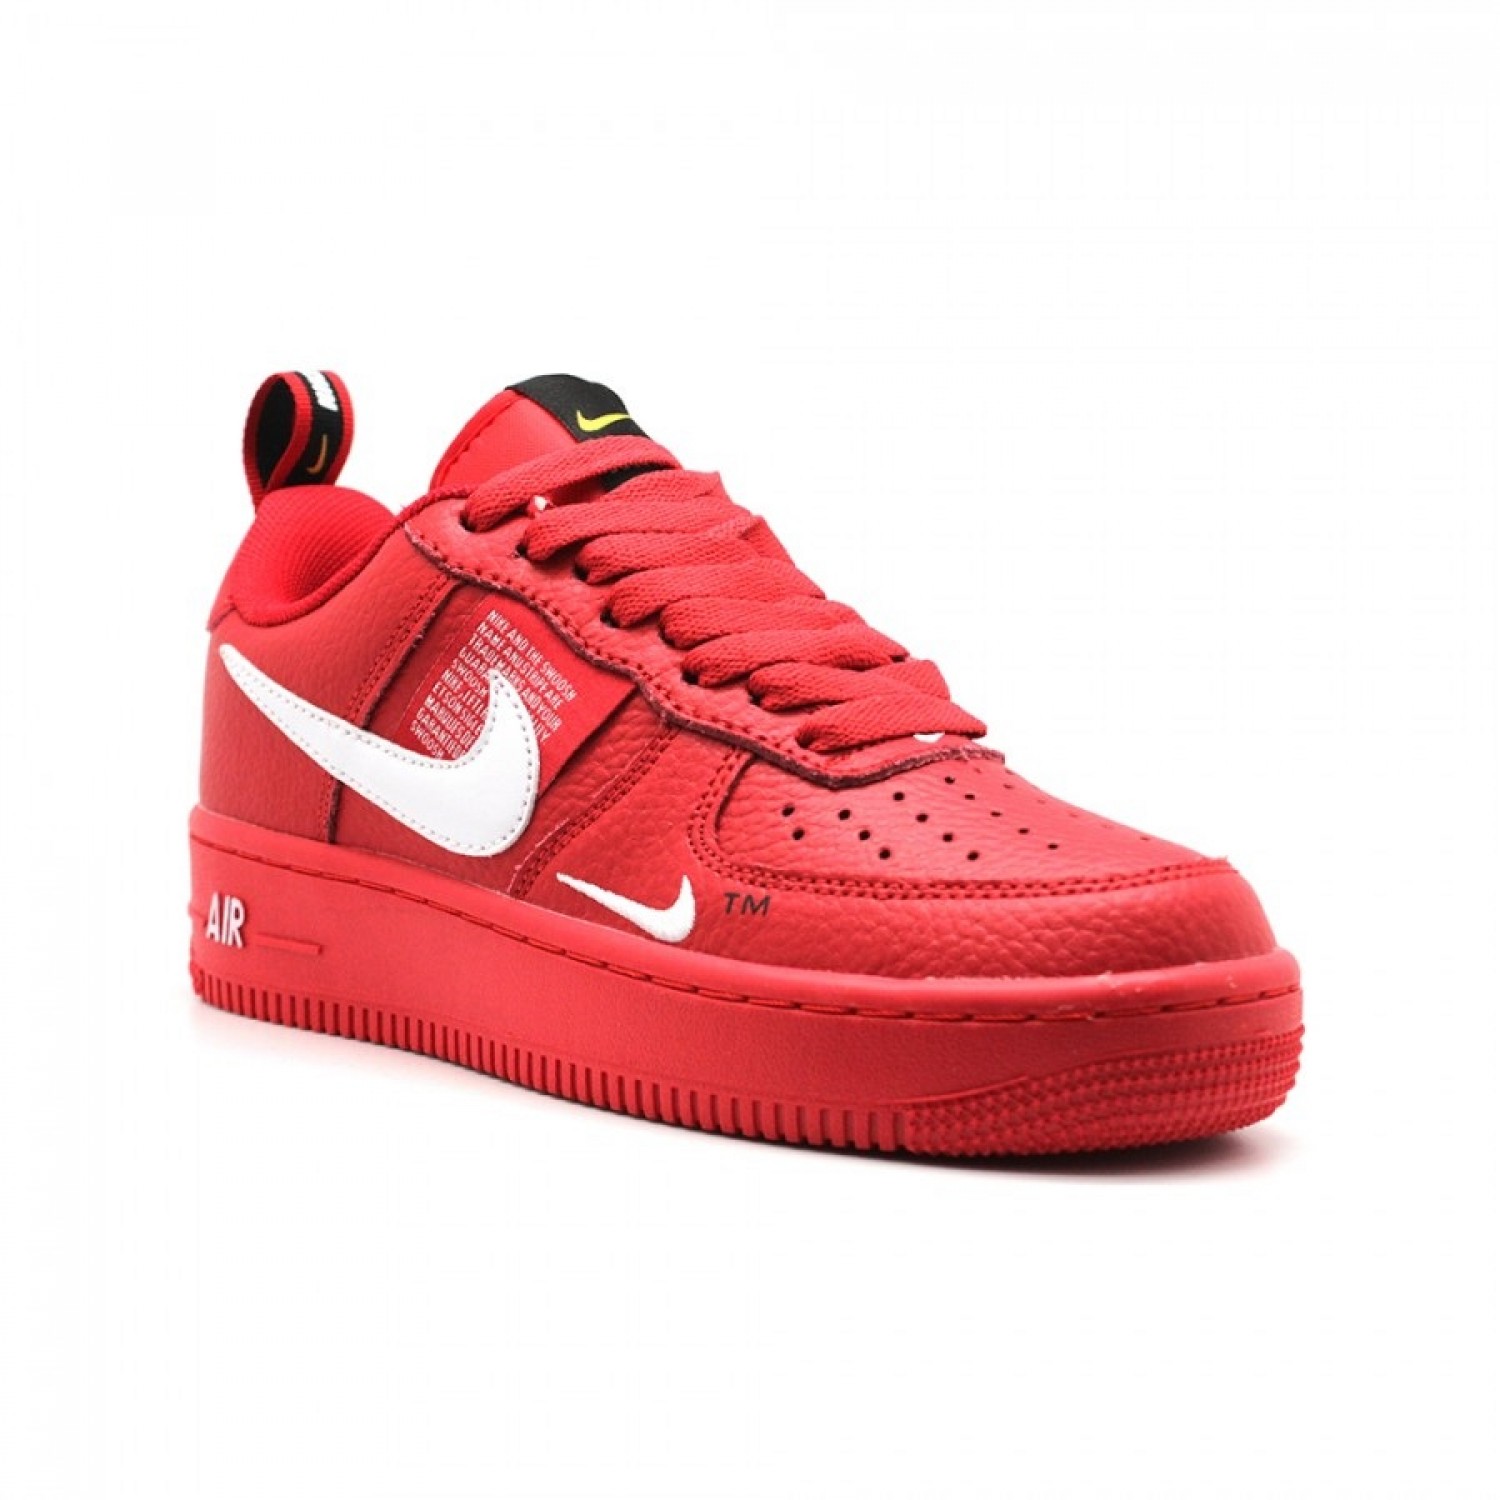 Кроссовки nike red. Nike Air Force 1 Red. Nike Air Force 1 Low '07 lv8. Nike Air Force 1 07 lv8 Red. Nike Air Force 1 07 lv8 Utility.